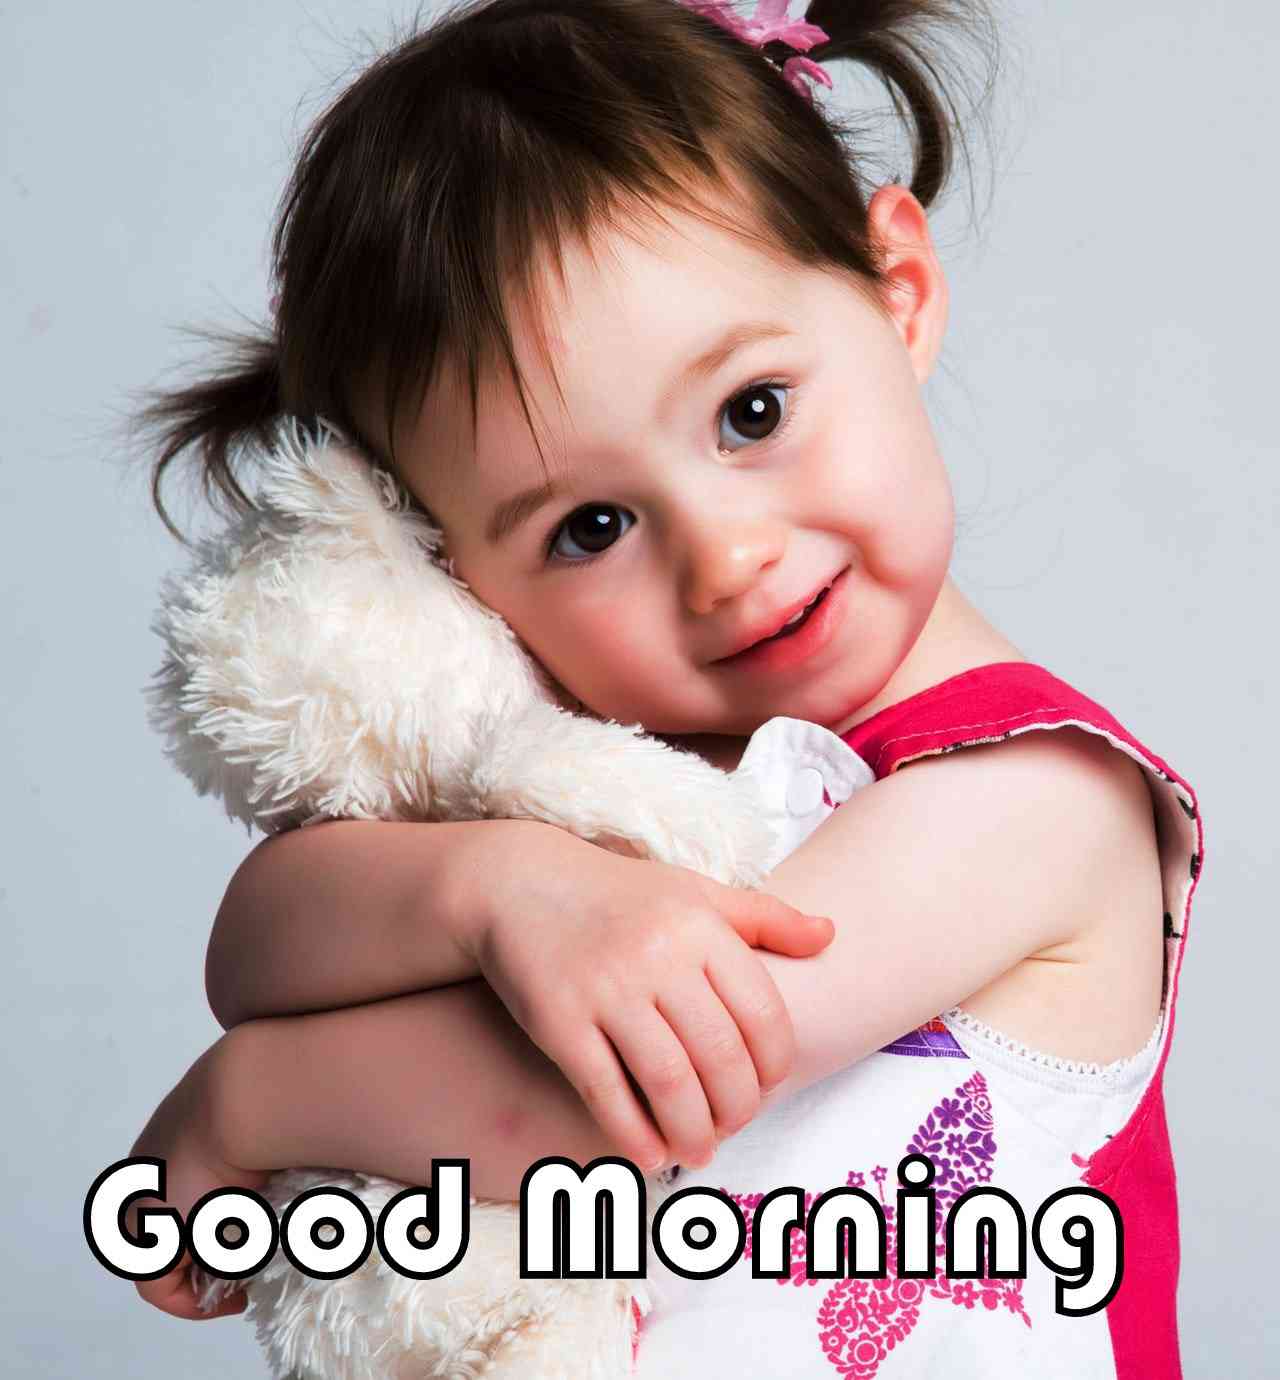 149+ Good Morning Images HD - Collection of Beautiful Good Morning ...